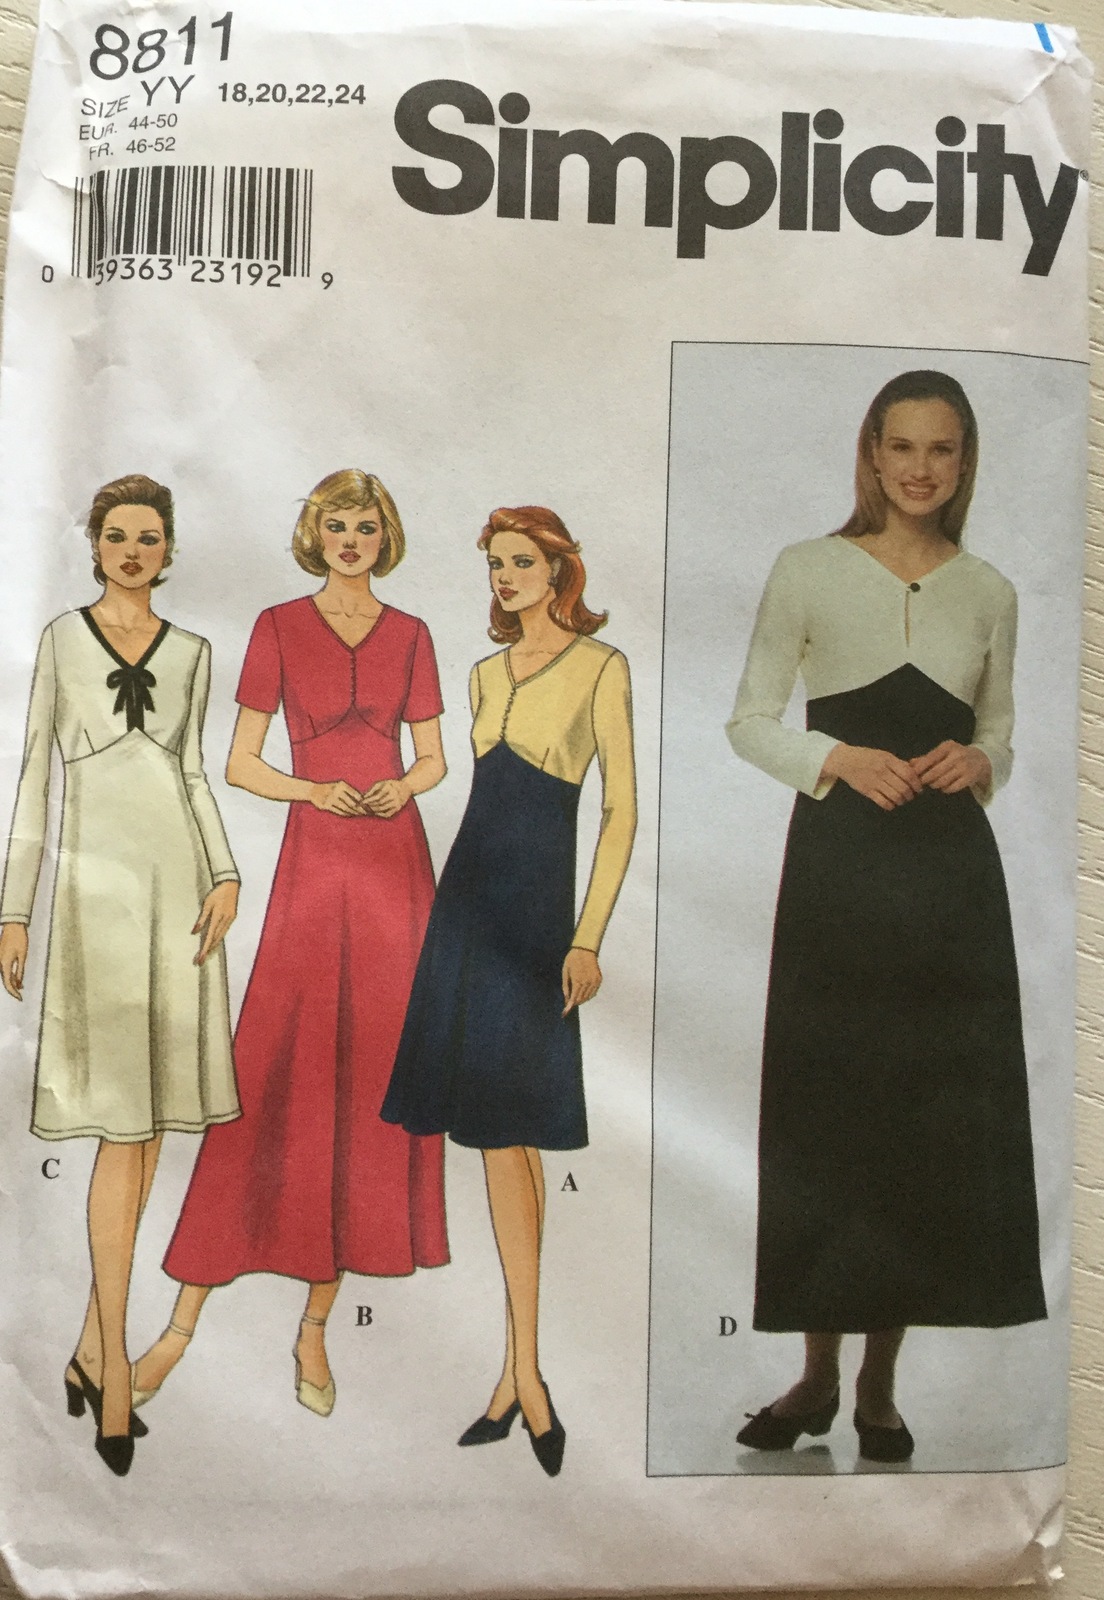 Simplicity 8811 Misses' High Waisted & Slightly Flared Dresses Size Y ...